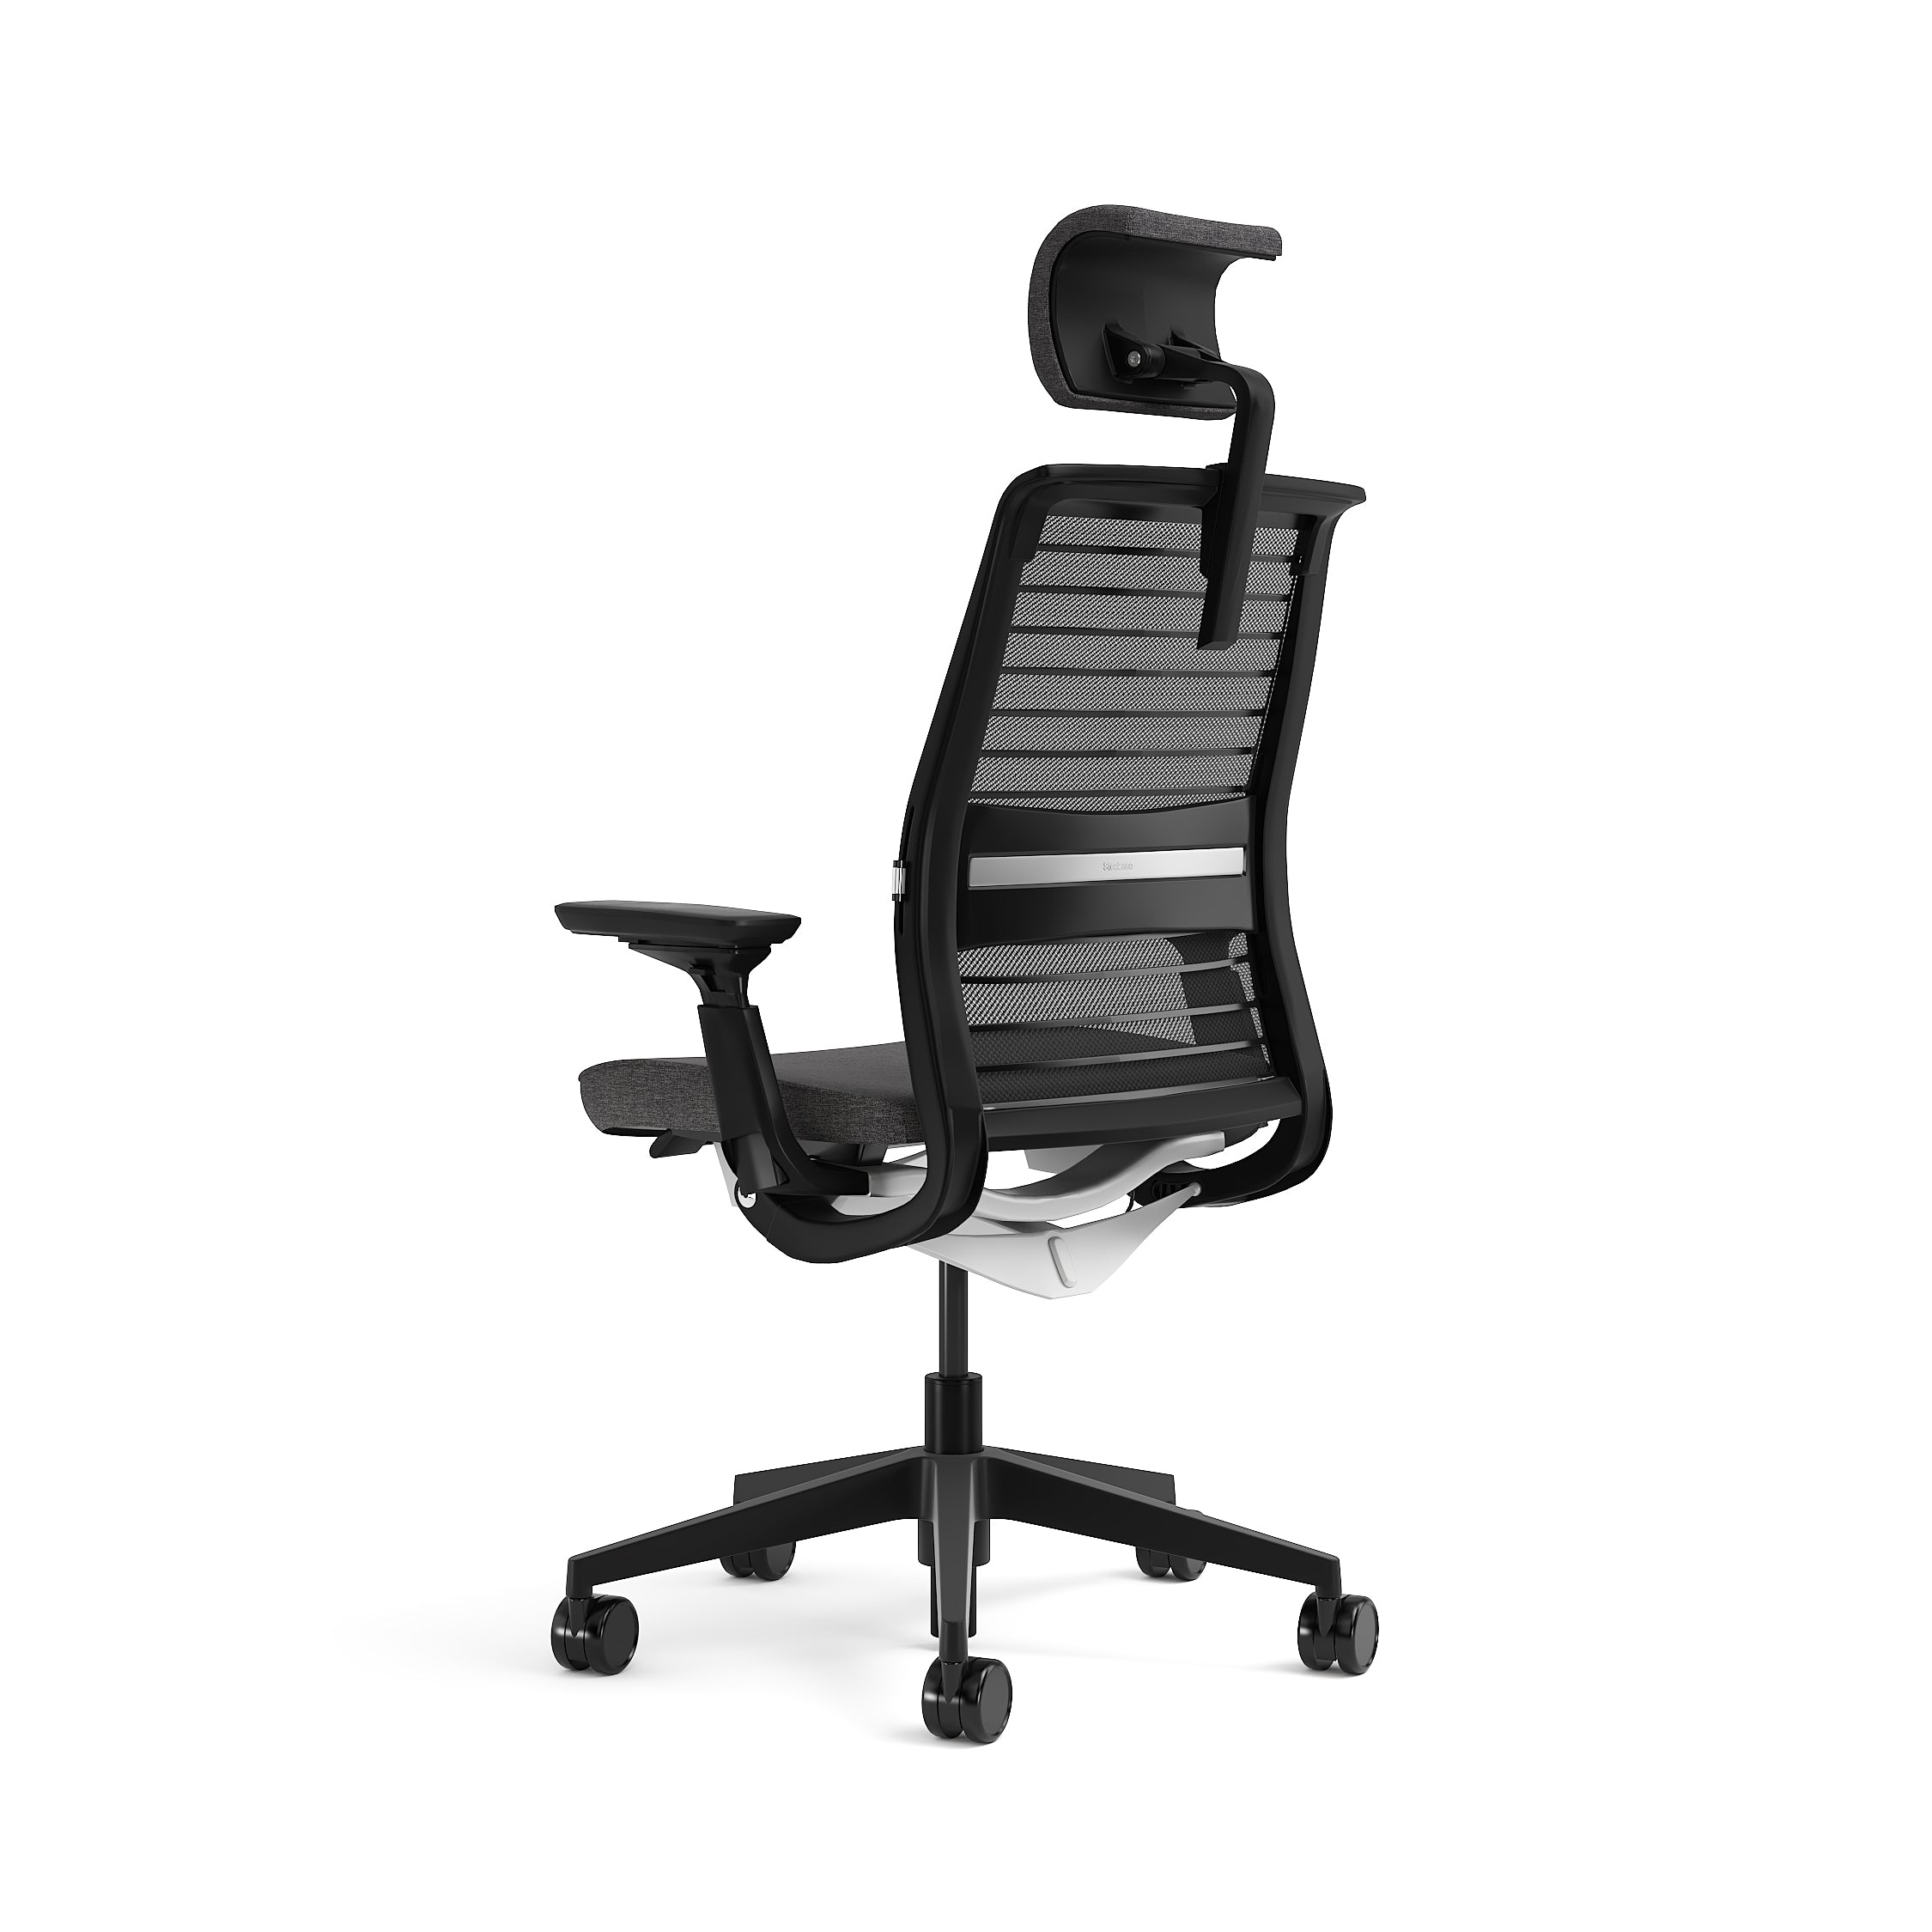 New Steelcase Think Chair India for Simple Design